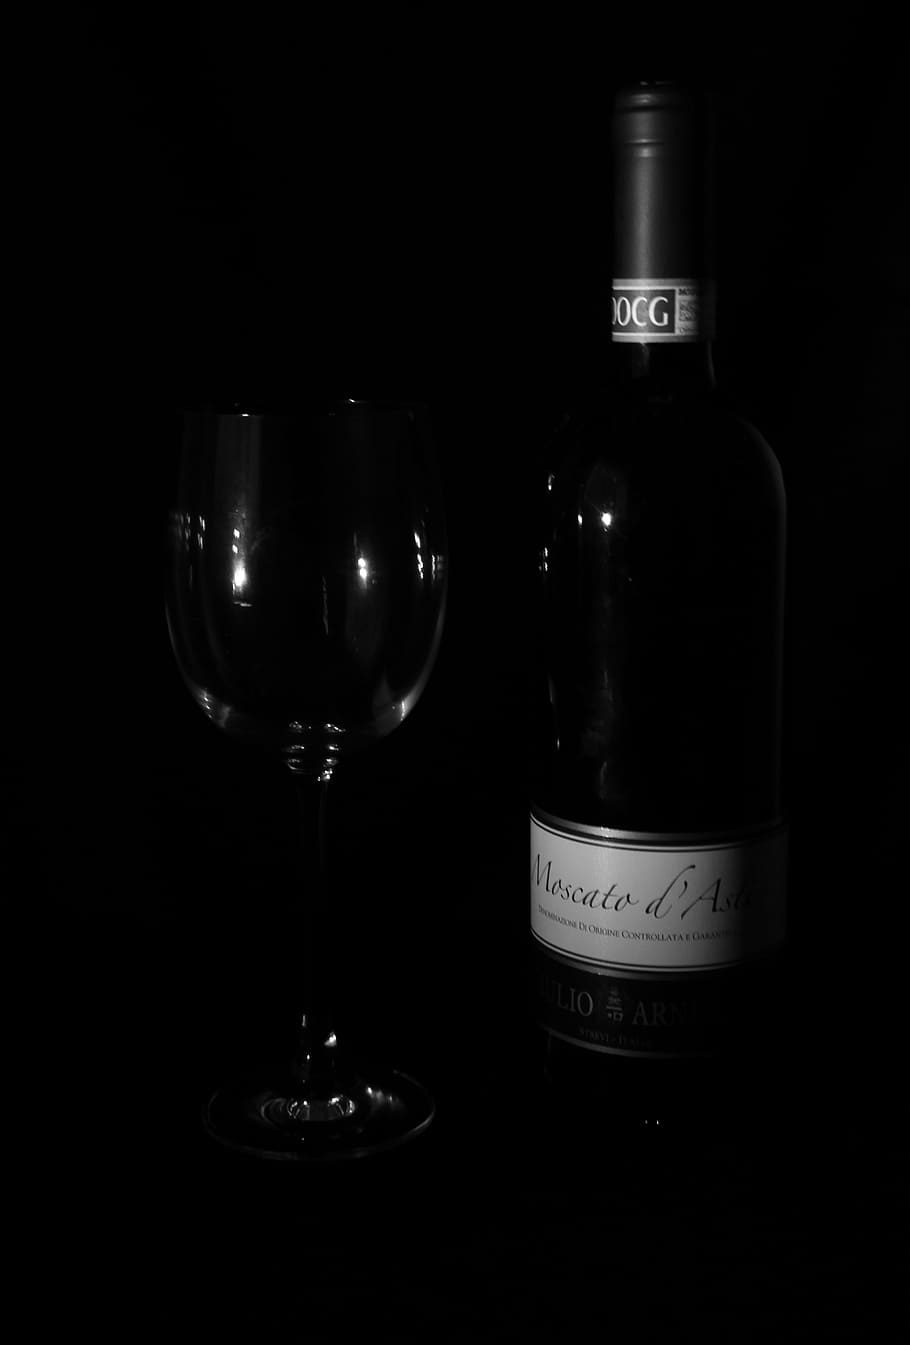 wine, glass, black and white, low key, dark, drink, bottle, food and drink, refreshment, still life